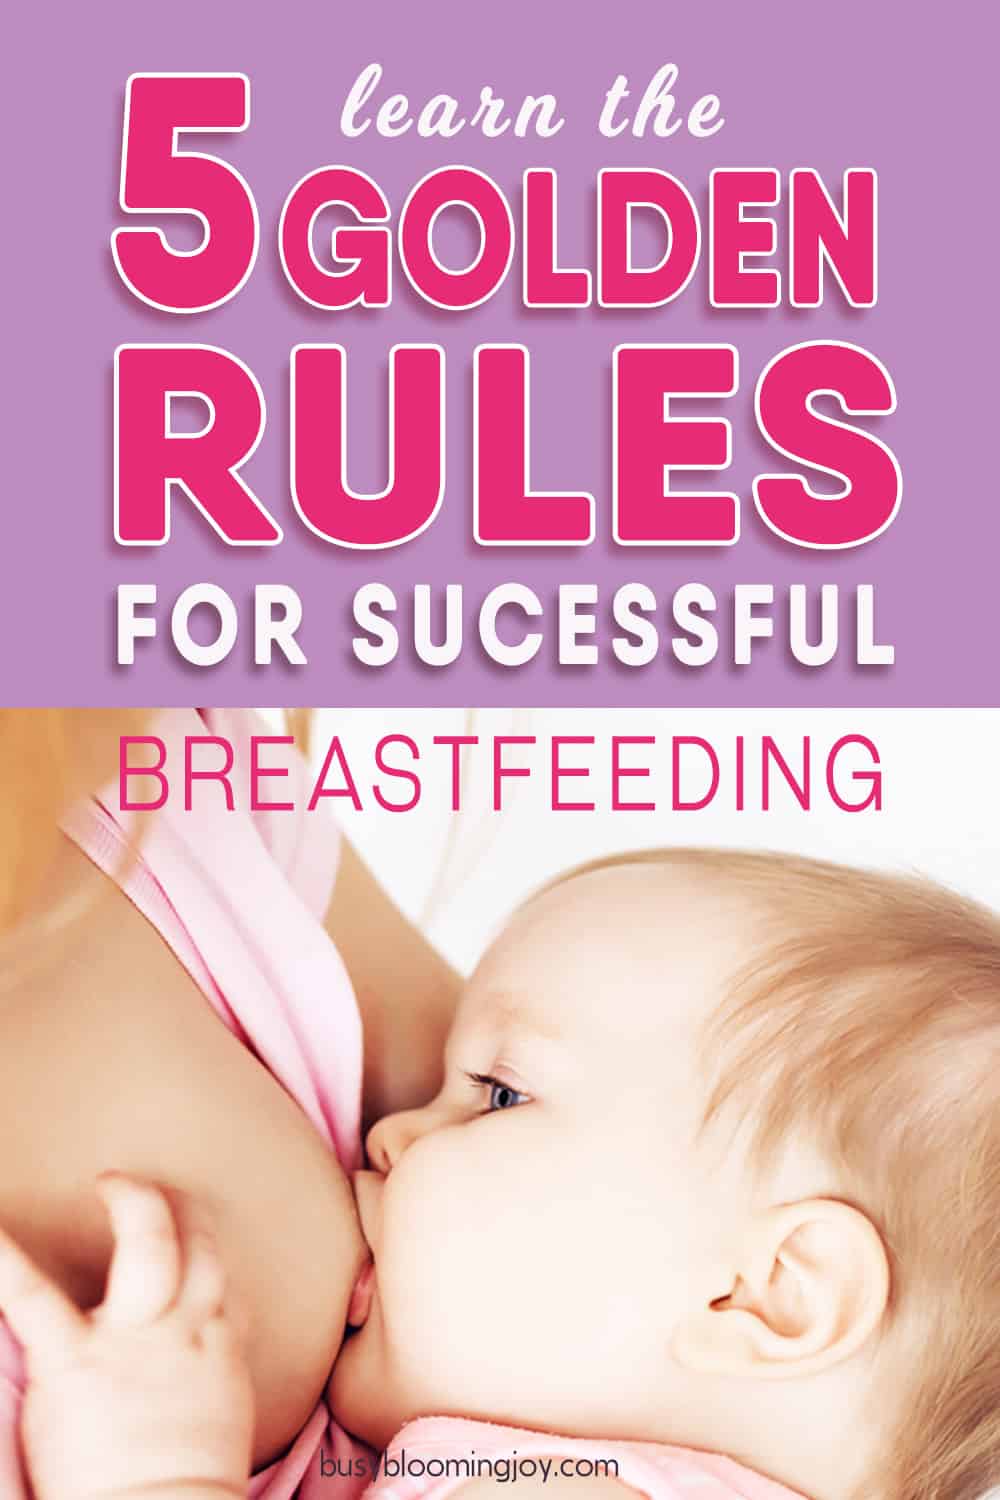 Learn the 5 golden rules to successful breastfeeding your newborn. There are many breastfeeding tips out there – but these are the 5 new moms need to start out right. These include info and tips on breastfeeding latch (inc. different breastfeeding positions), how to ensure you build up a good milk supply, what it means to ‘feed on demand’ and why you need to. When to switch breasts and how to keep track. The issues a comfort ‘breastfeed’ can cause your newborn. All the breastfeeding tips to start off right!